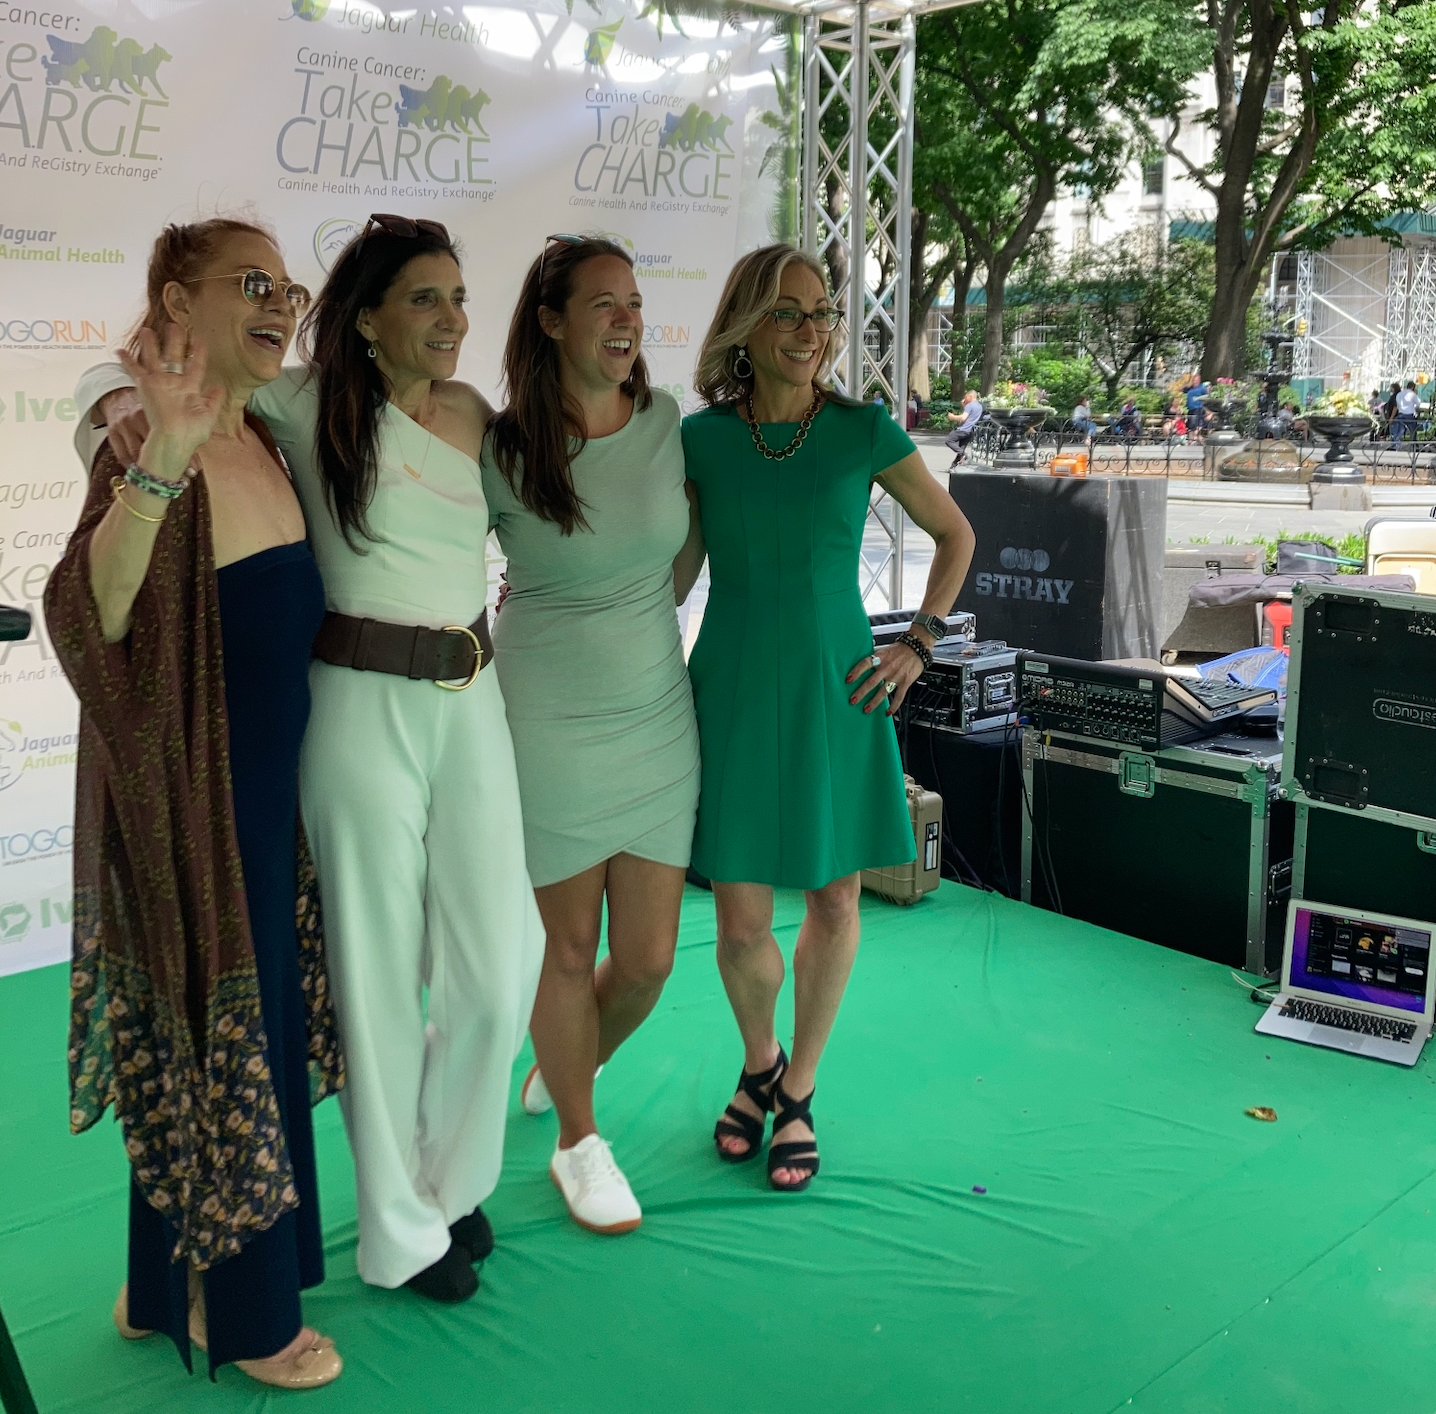 From left to right: Glo Janata, JD, TogoRun president, CEO, and owner; Lisa Conte, CEO, president, and founder of Jaguar Health; Chelsea Rhoads, Ivee CEO and founder; and Sue Ettinger, DVM, DACVIM (Oncology). 